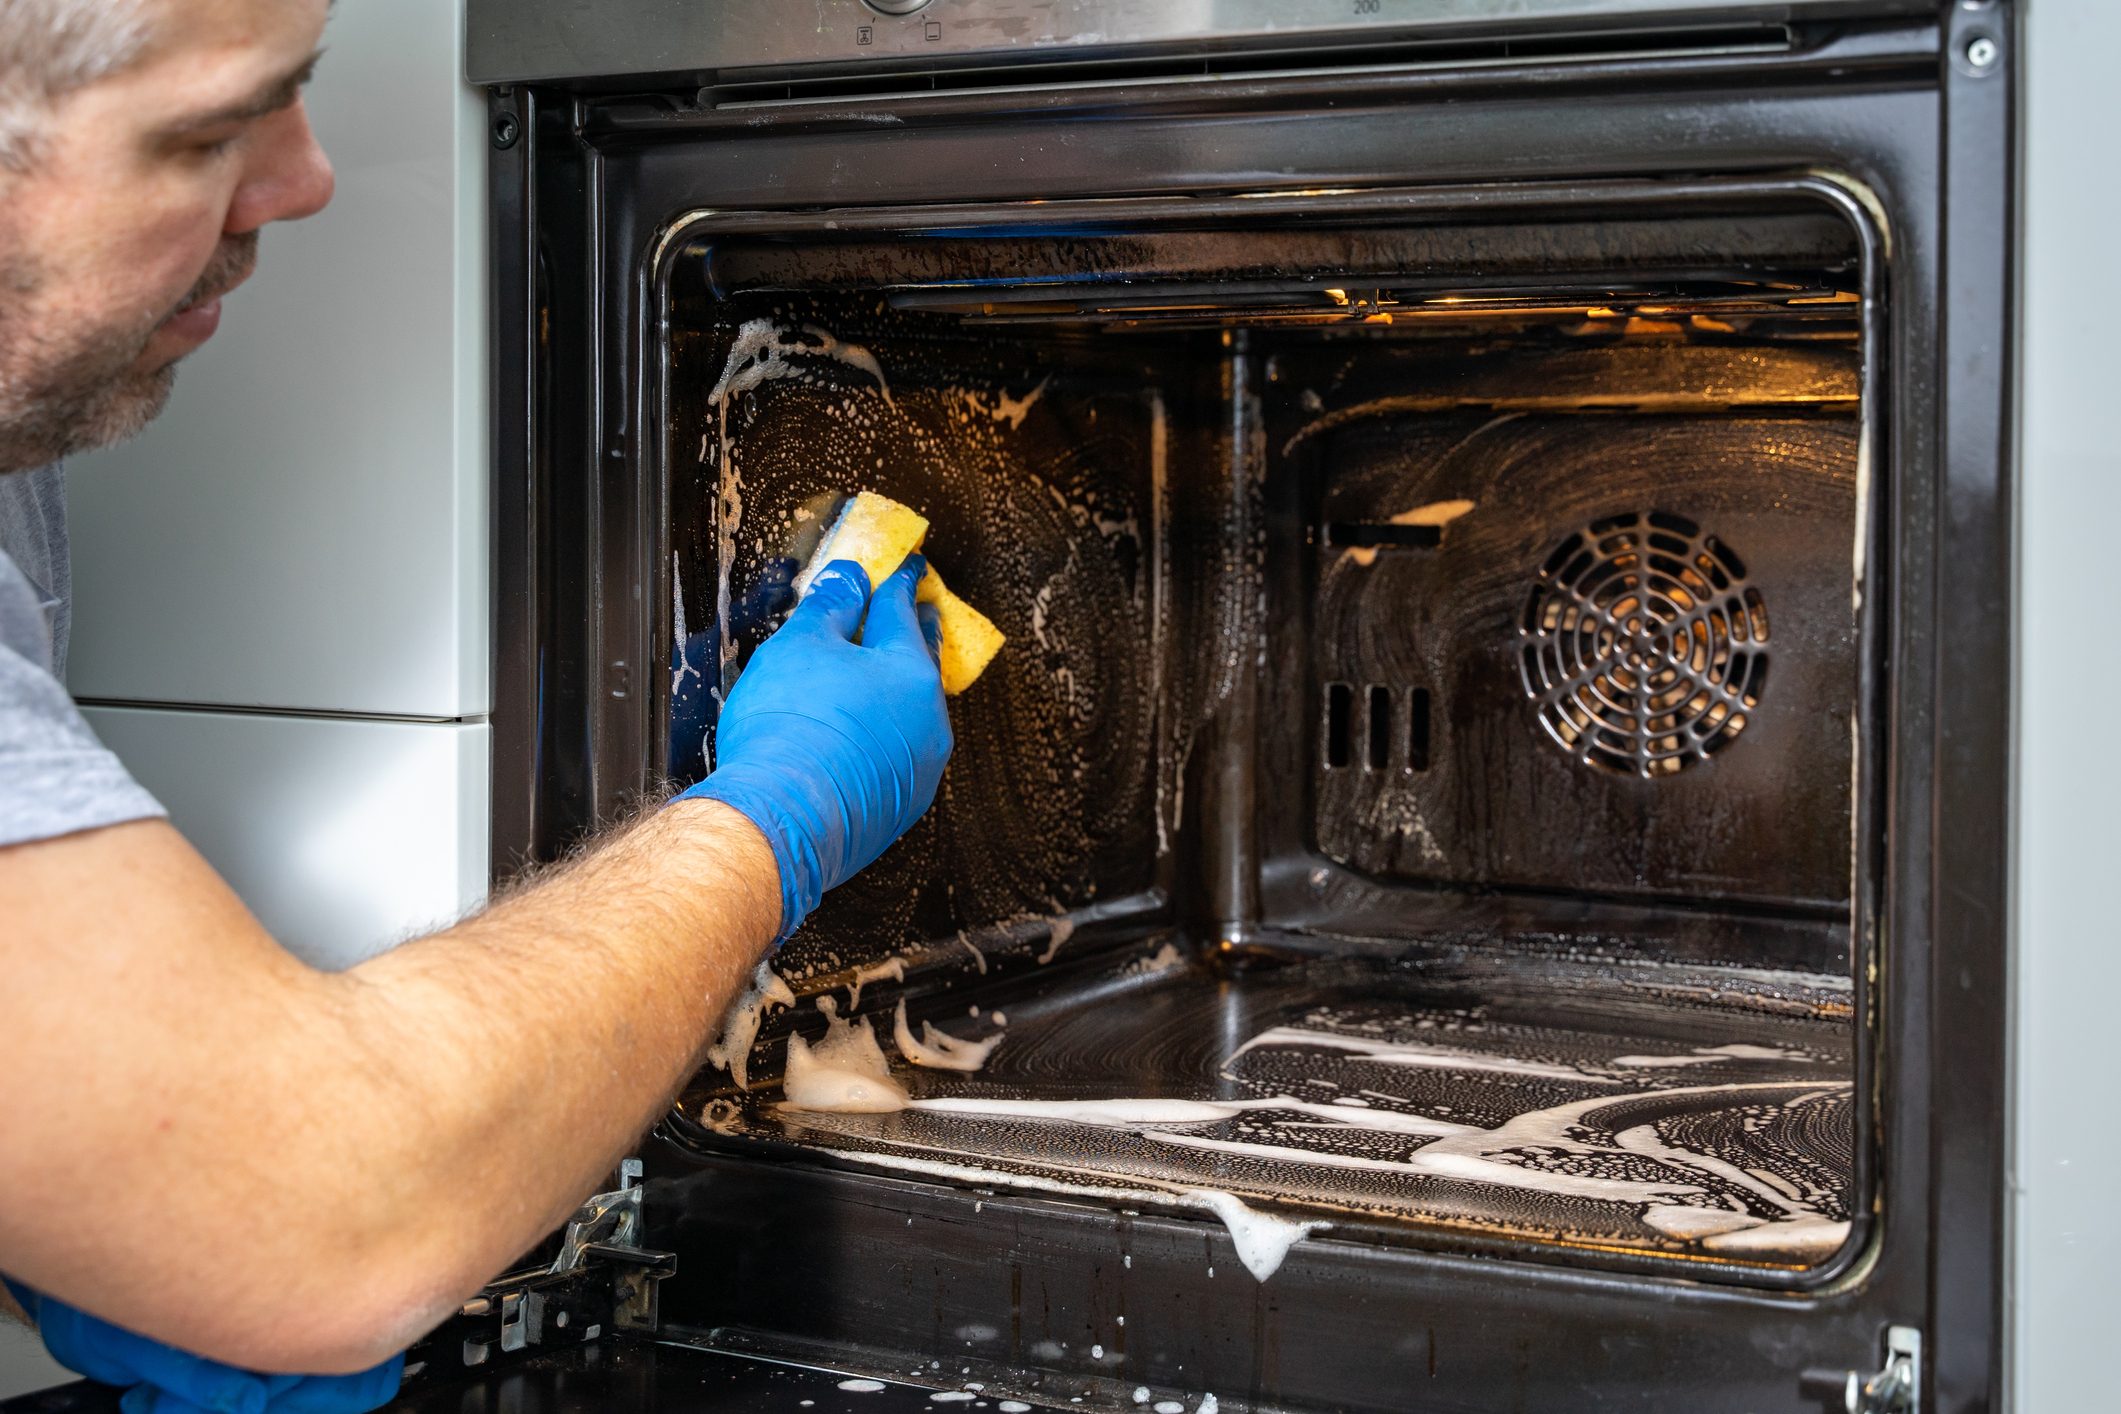 How to Use Self-Clean on an Oven